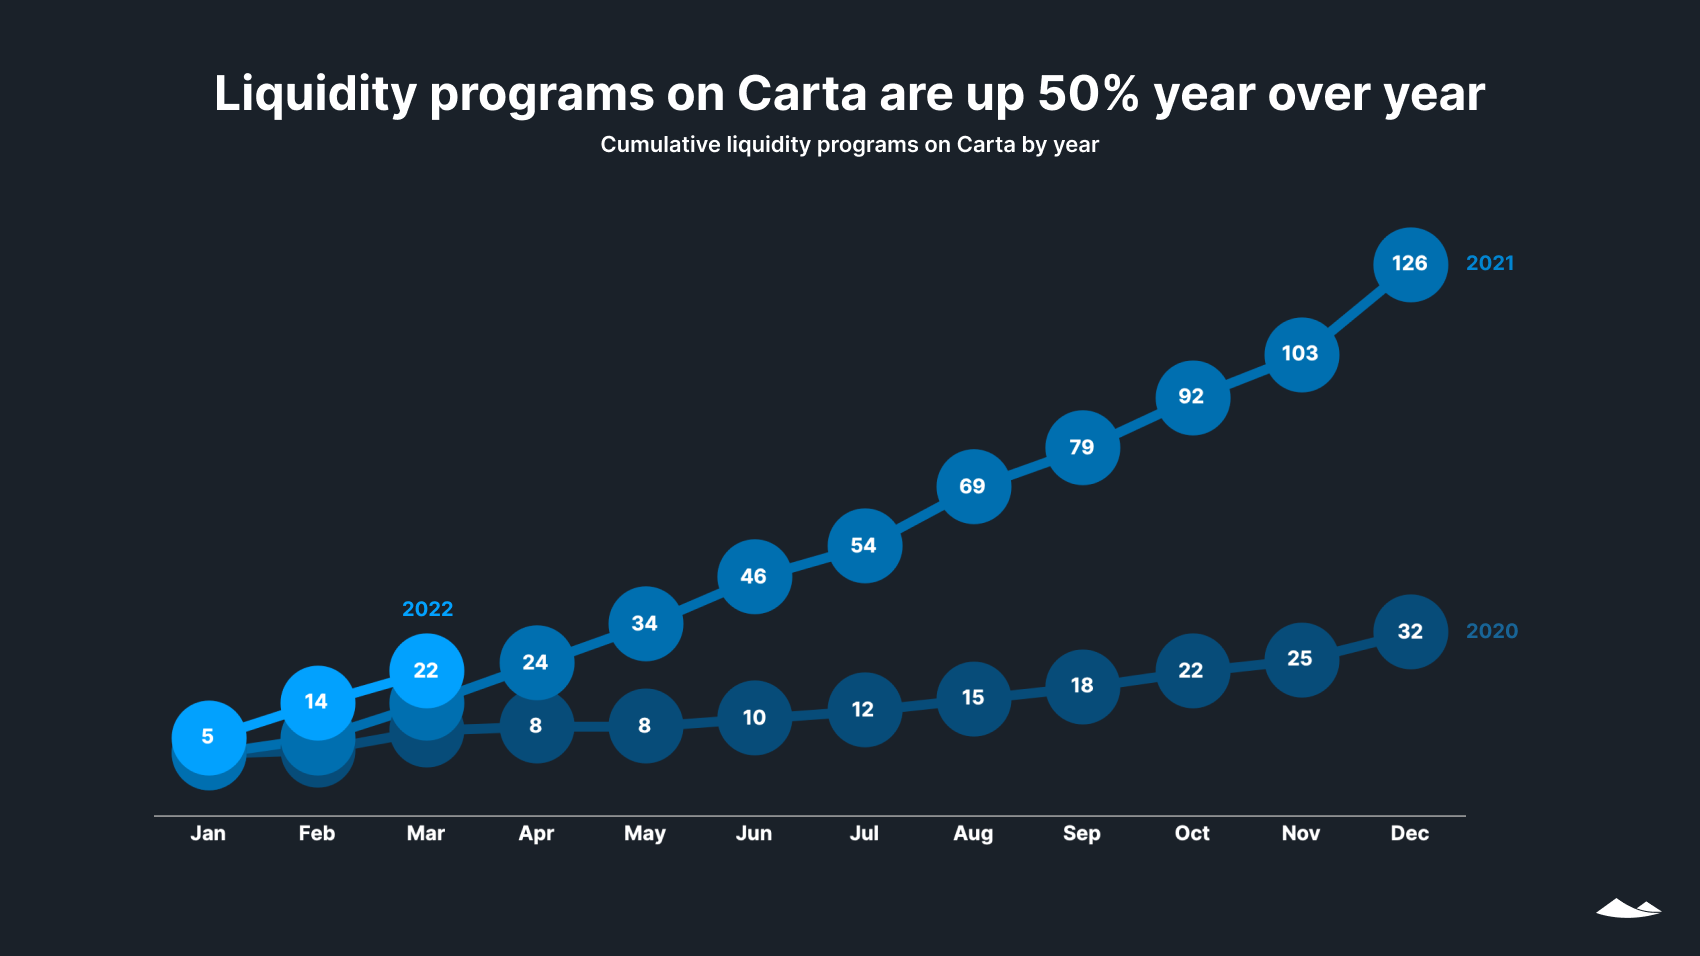 Line chart shows the number of liquidity programs on Carta in Q1 2022 tracked to outpace the number in both 2021 and 2020.